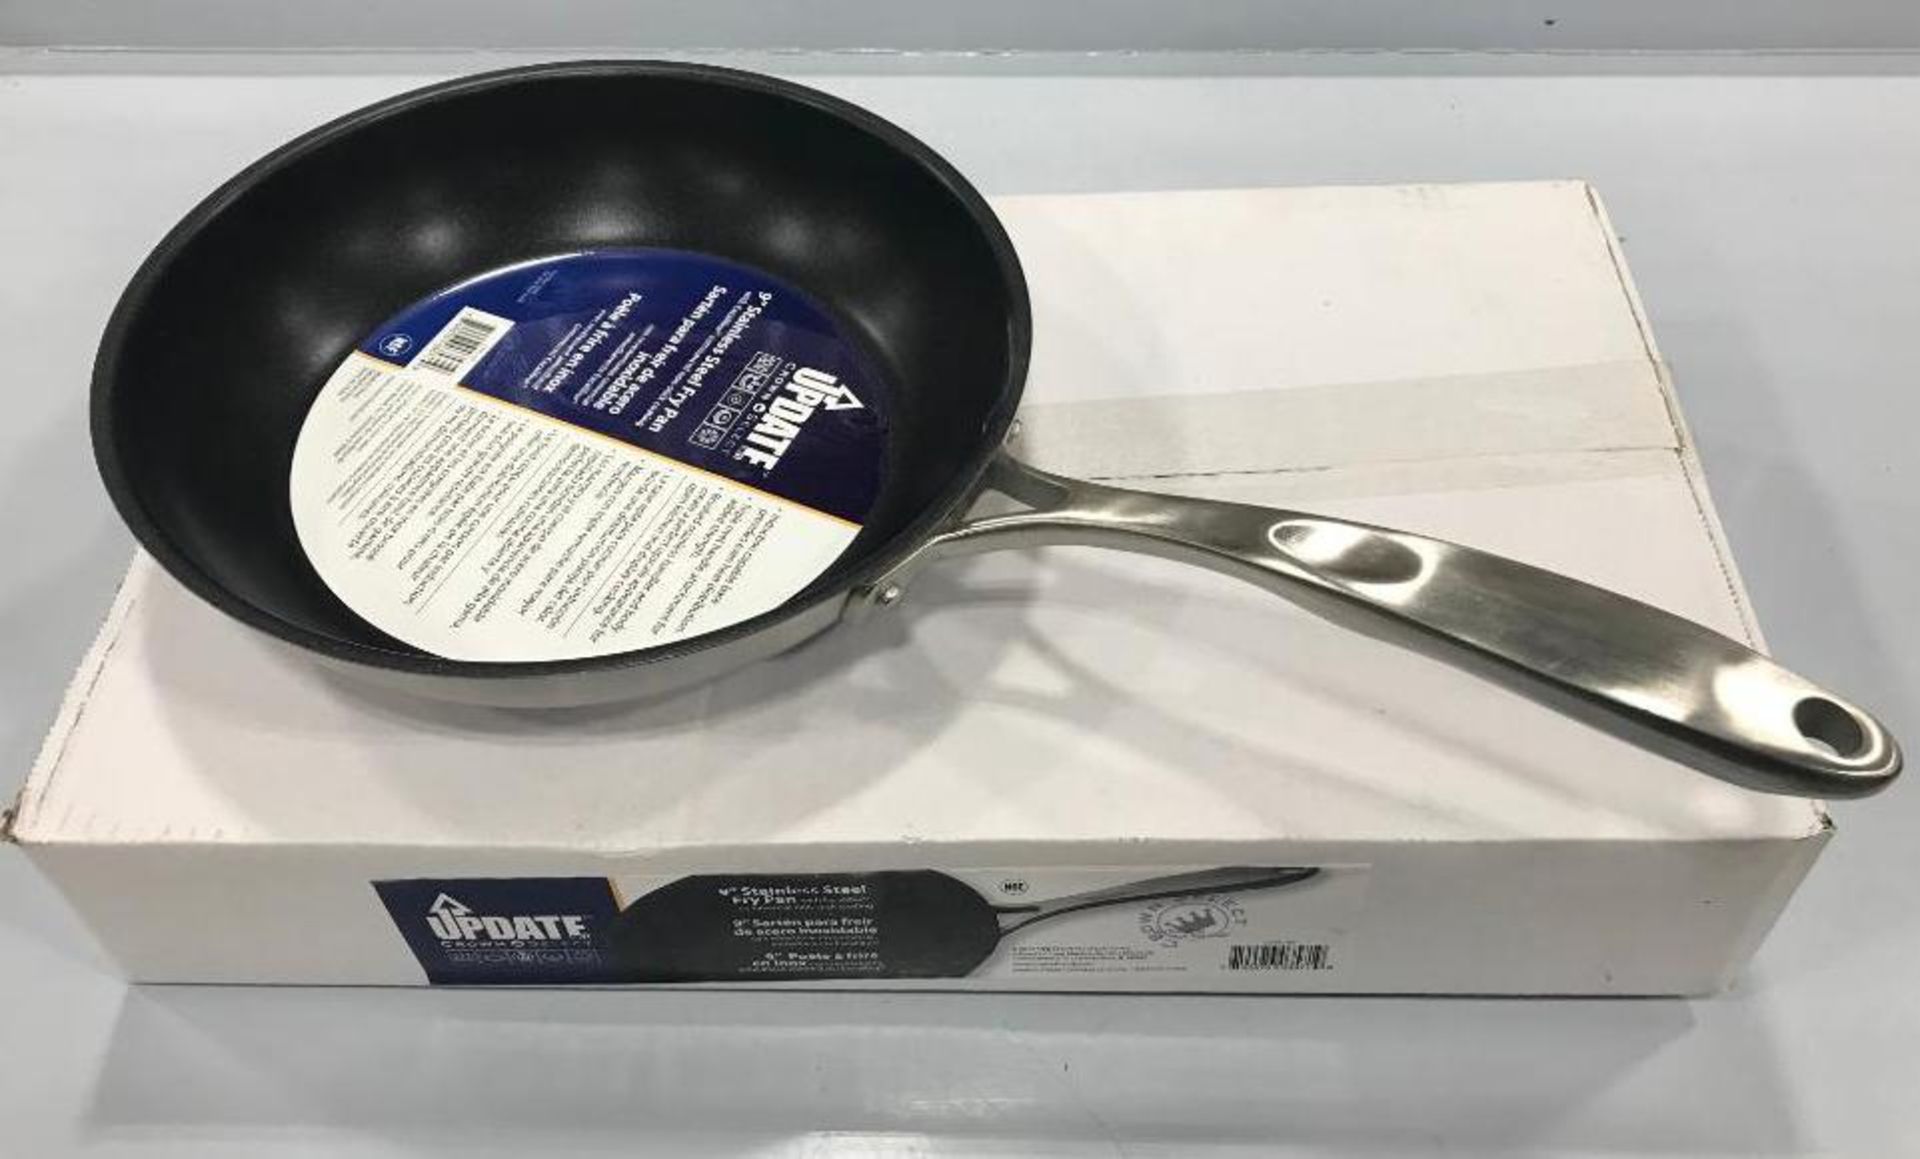 9" STAINLESS STEEL FRYING PAN W/ EXCALIBUR NON-STICK COATING - UPDATE CFPC-09 - NEW